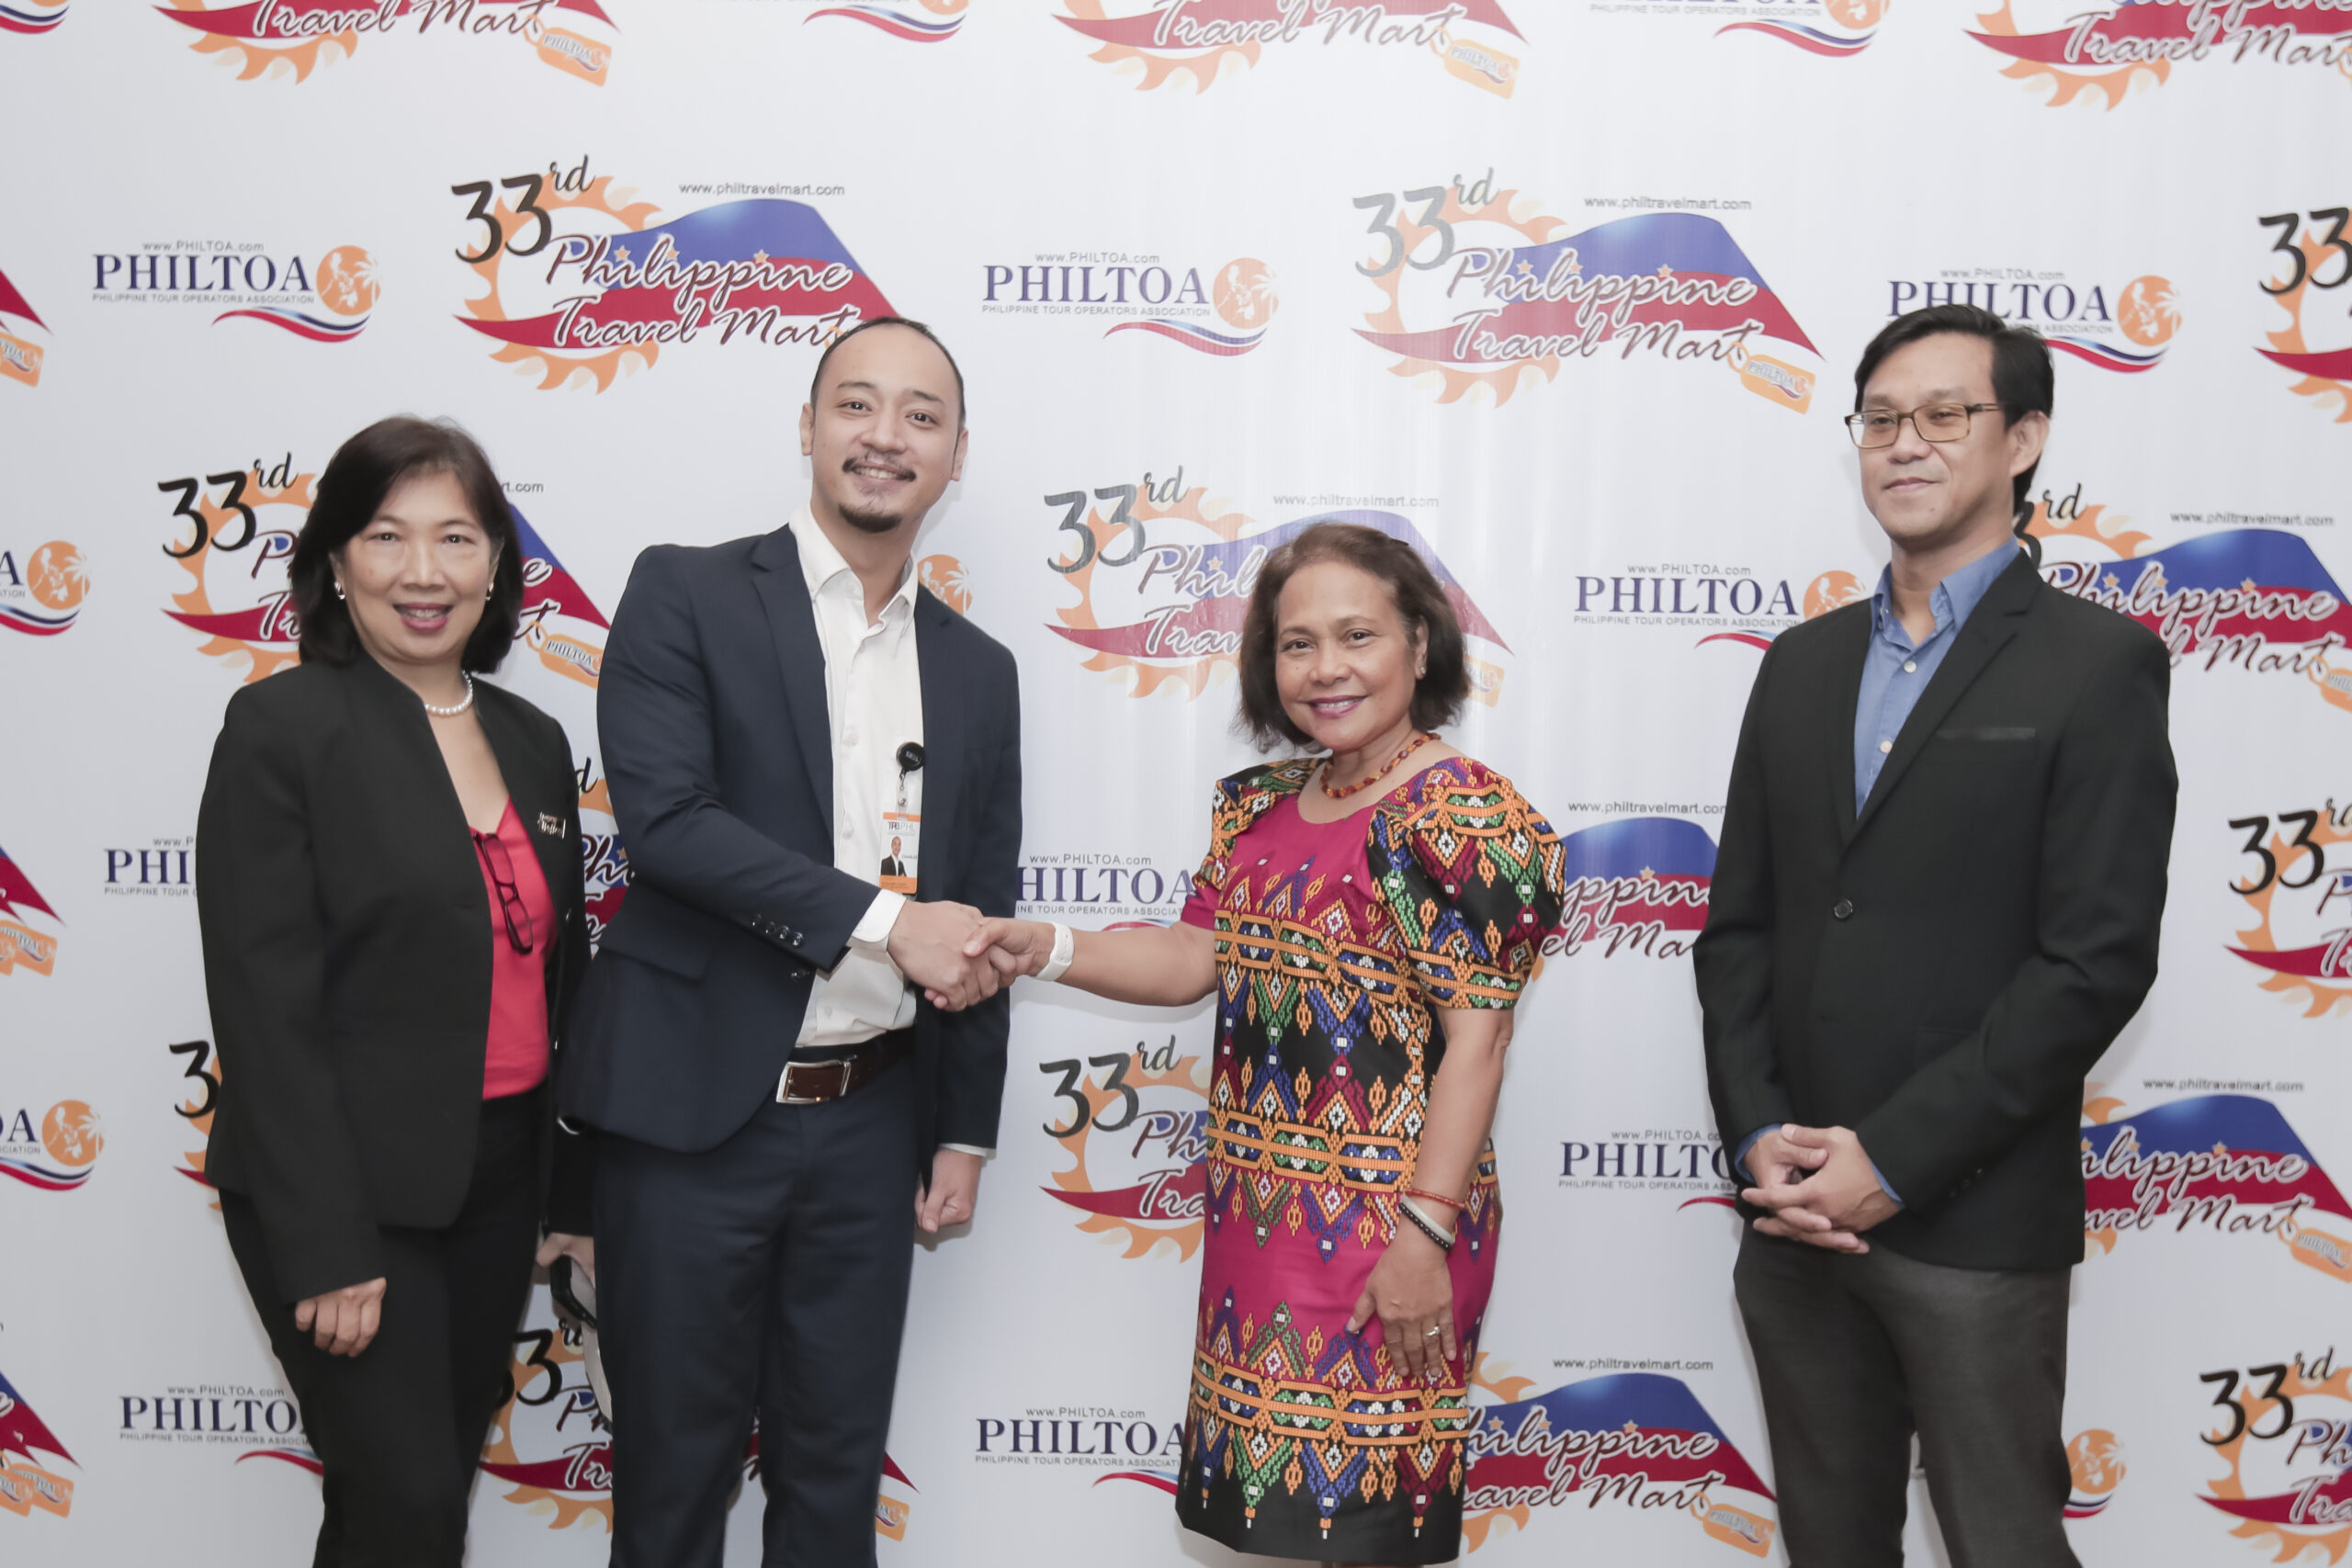 philippine tourism promotions board functions